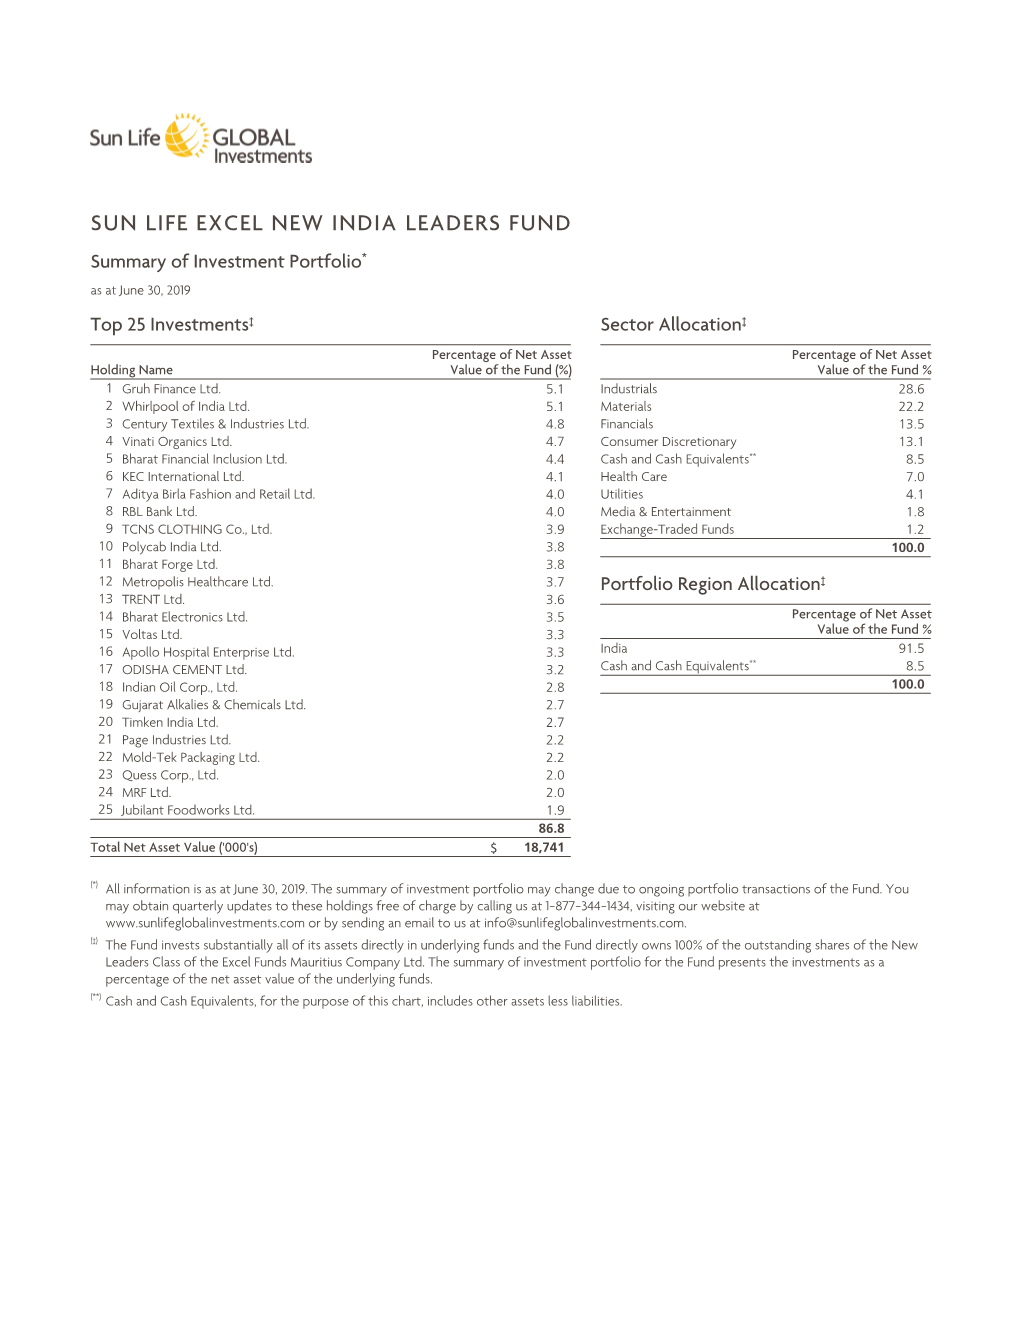 Sun Life Excel New India Leaders Fund